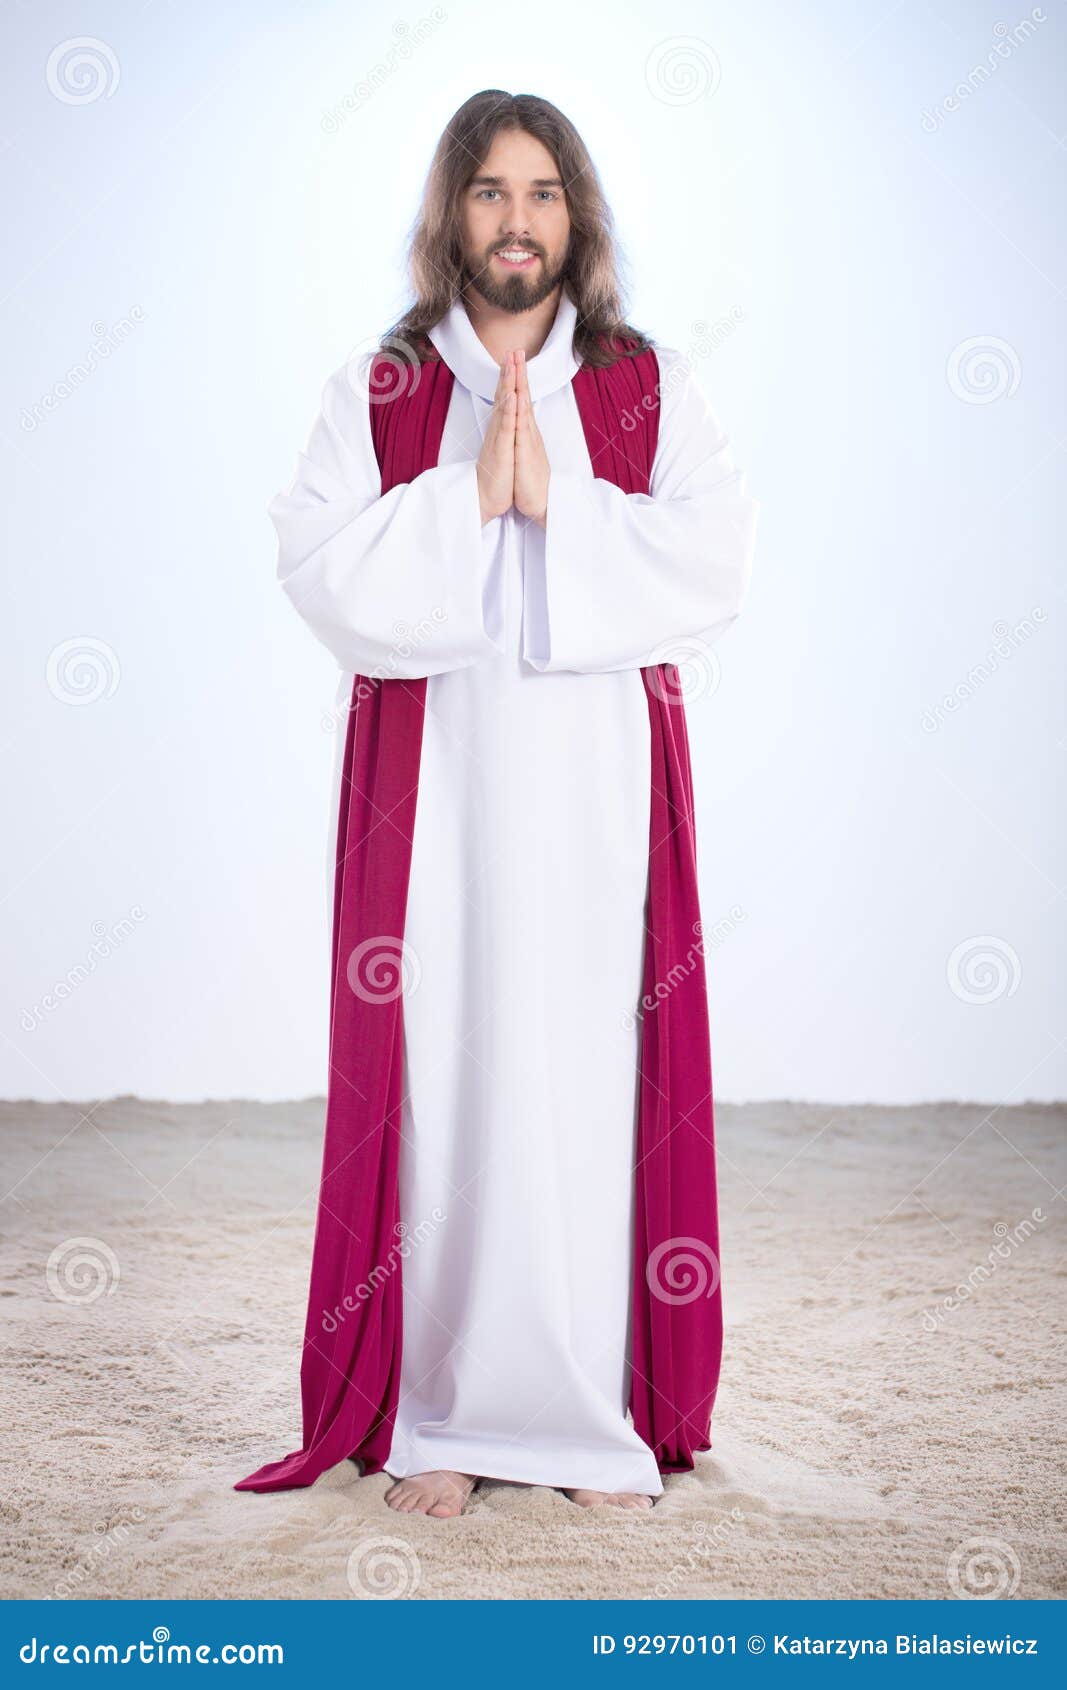 Jesus standing and smiling stock image. Image of icon - 92970101